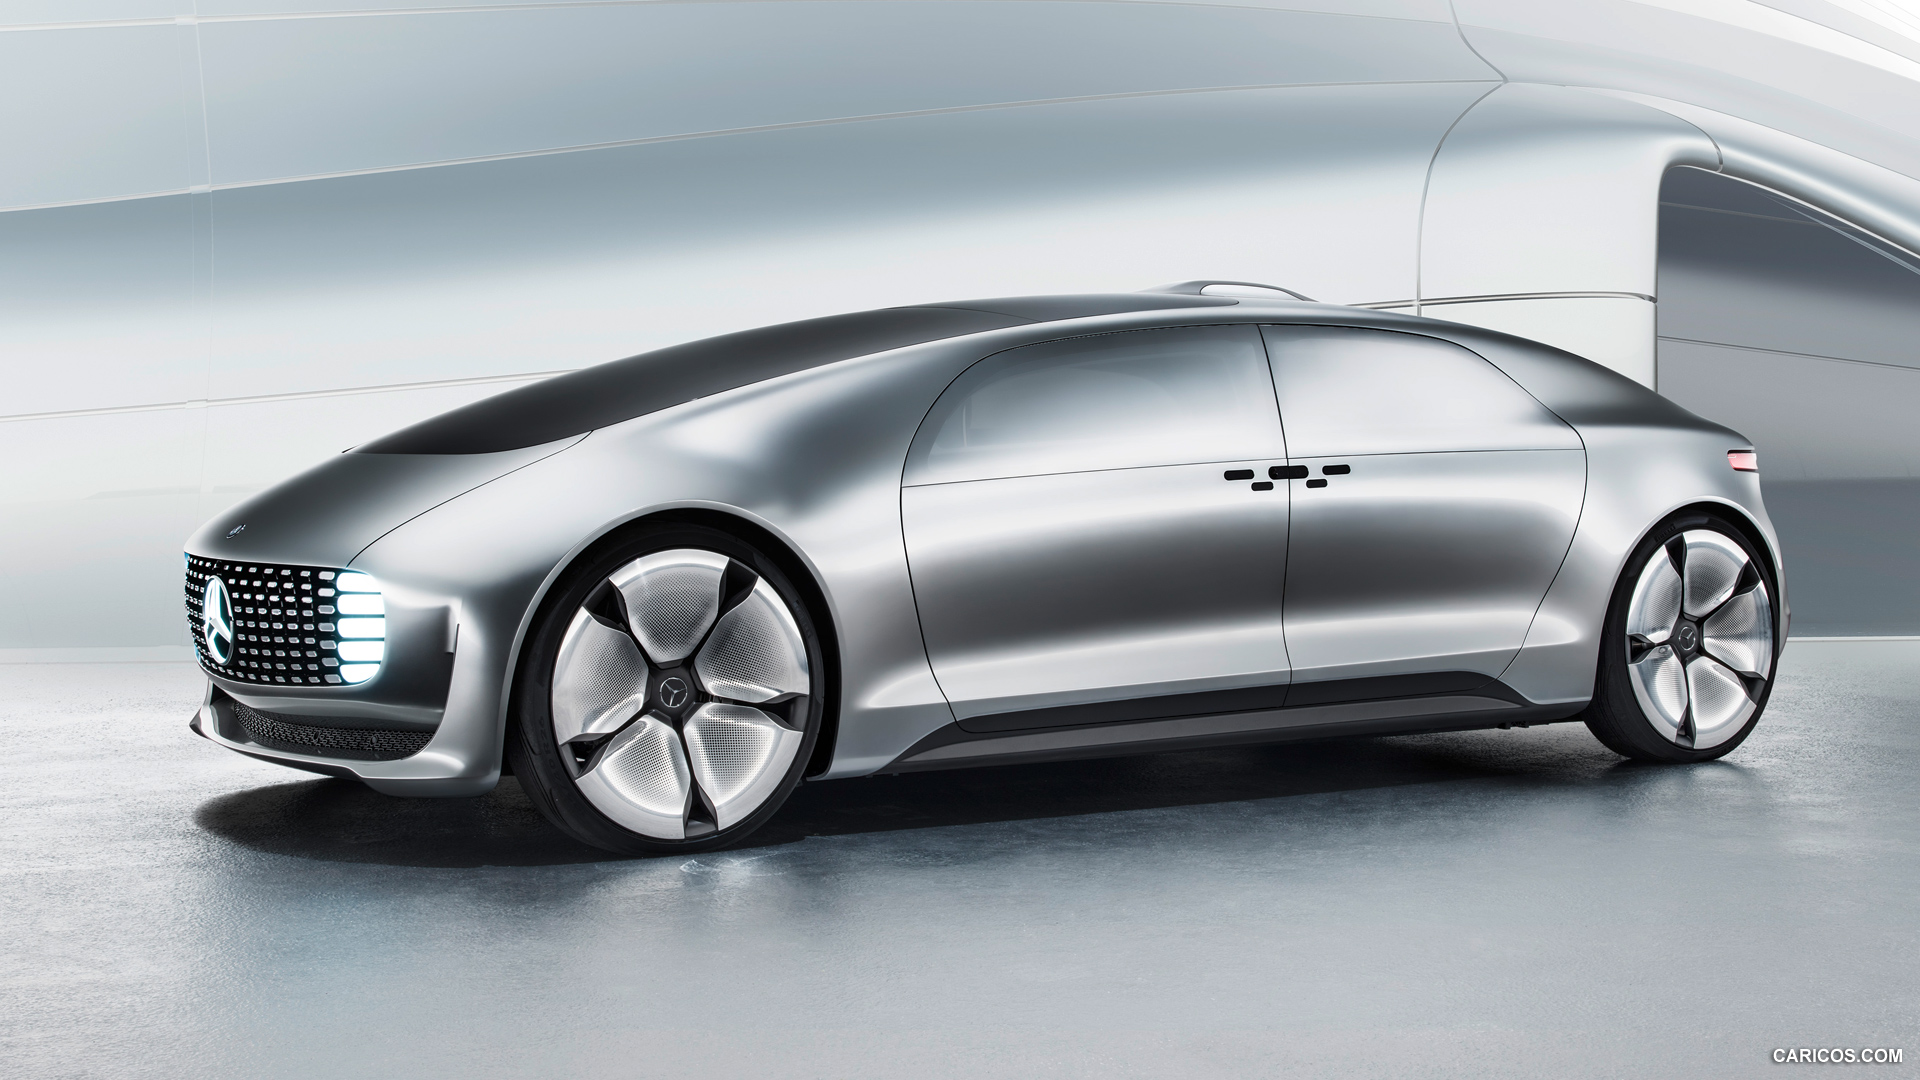 2015 Mercedes-Benz F 015 Luxury in Motion Concept  - Side, #63 of 92